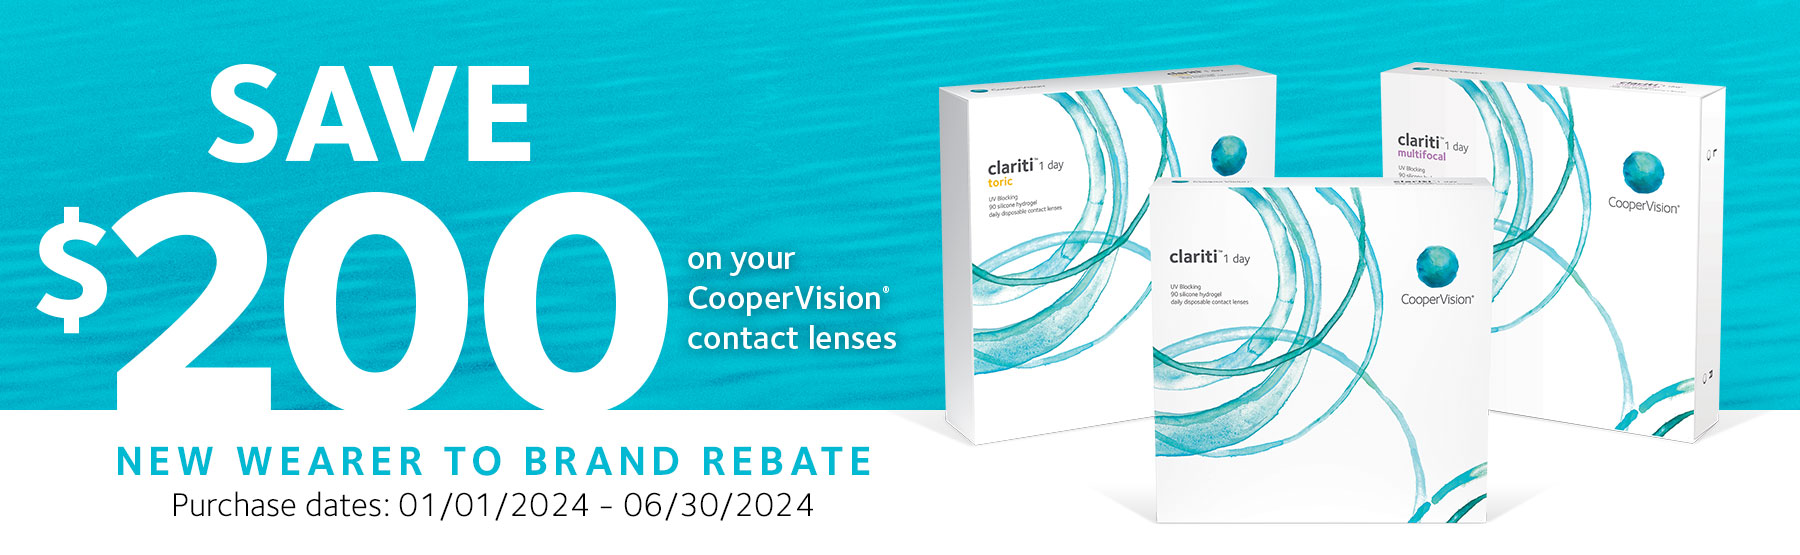 Save $200 on your clariti 1 day contact lenses